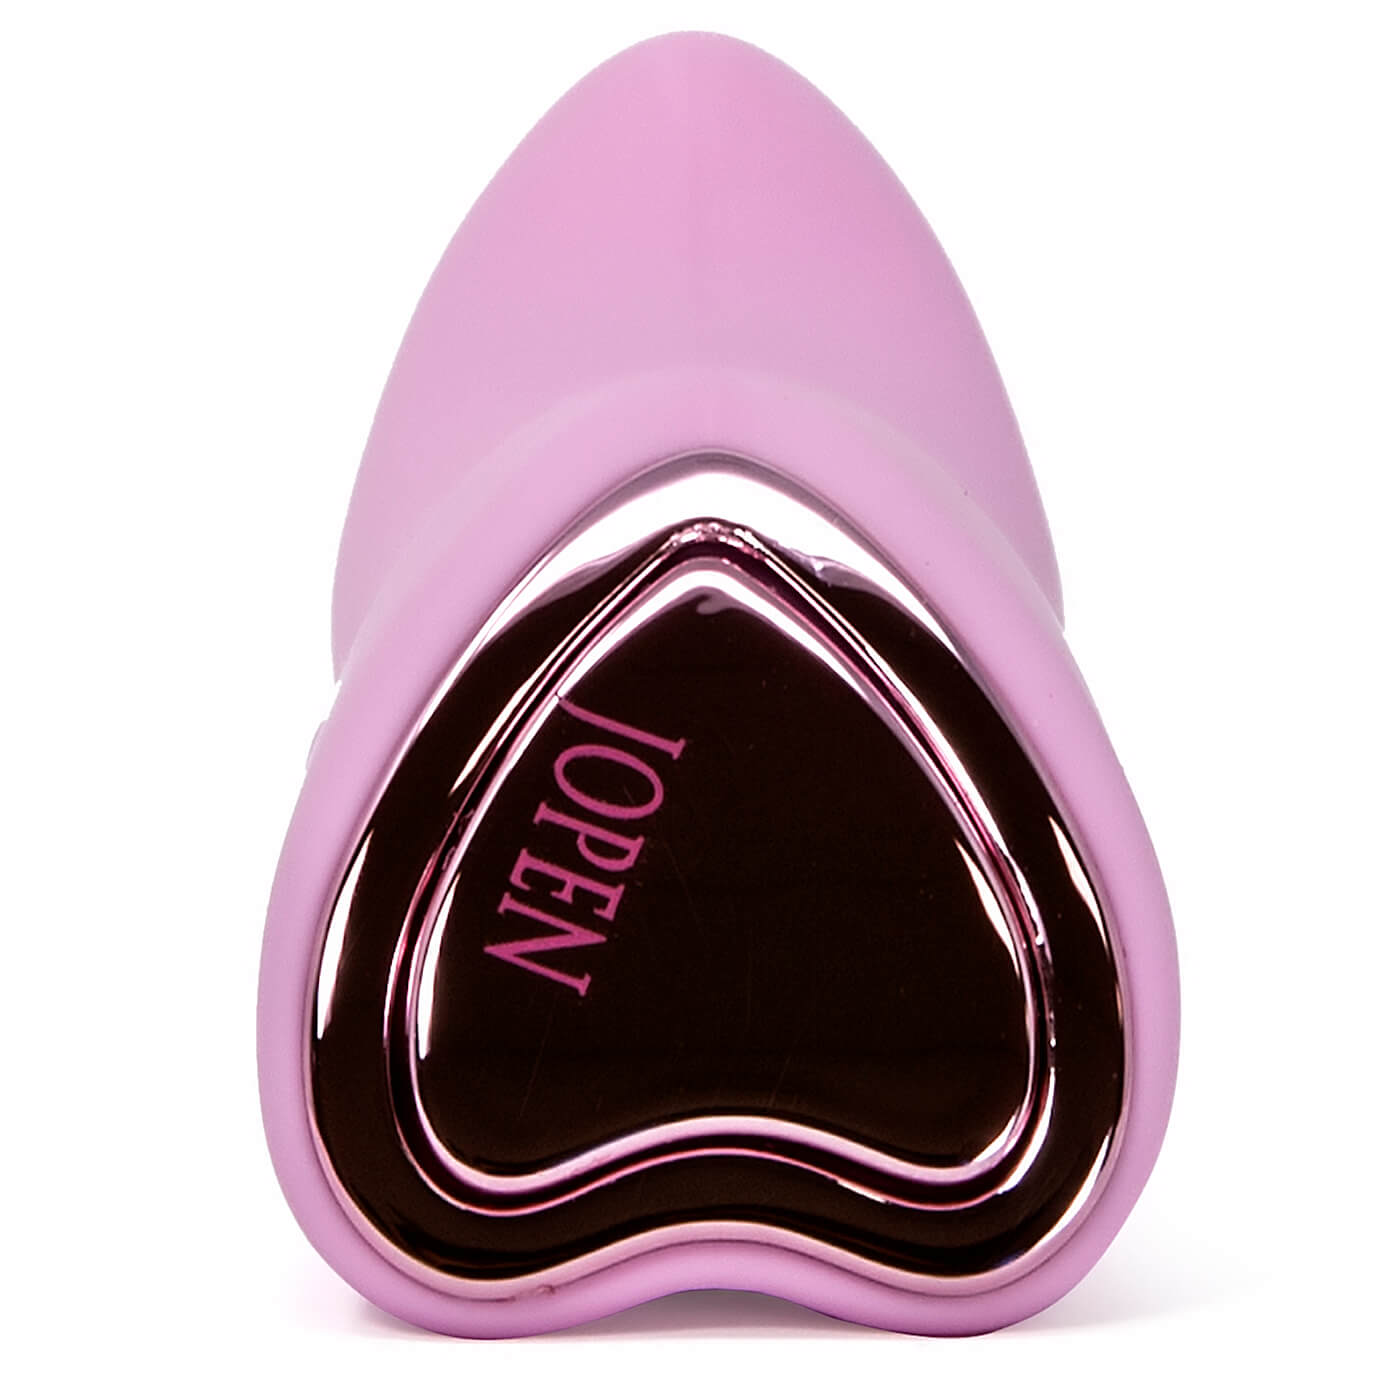 Jopen Amour Mini G 5 Speed USB Rechargeable Silicone G-Spot Vibrator